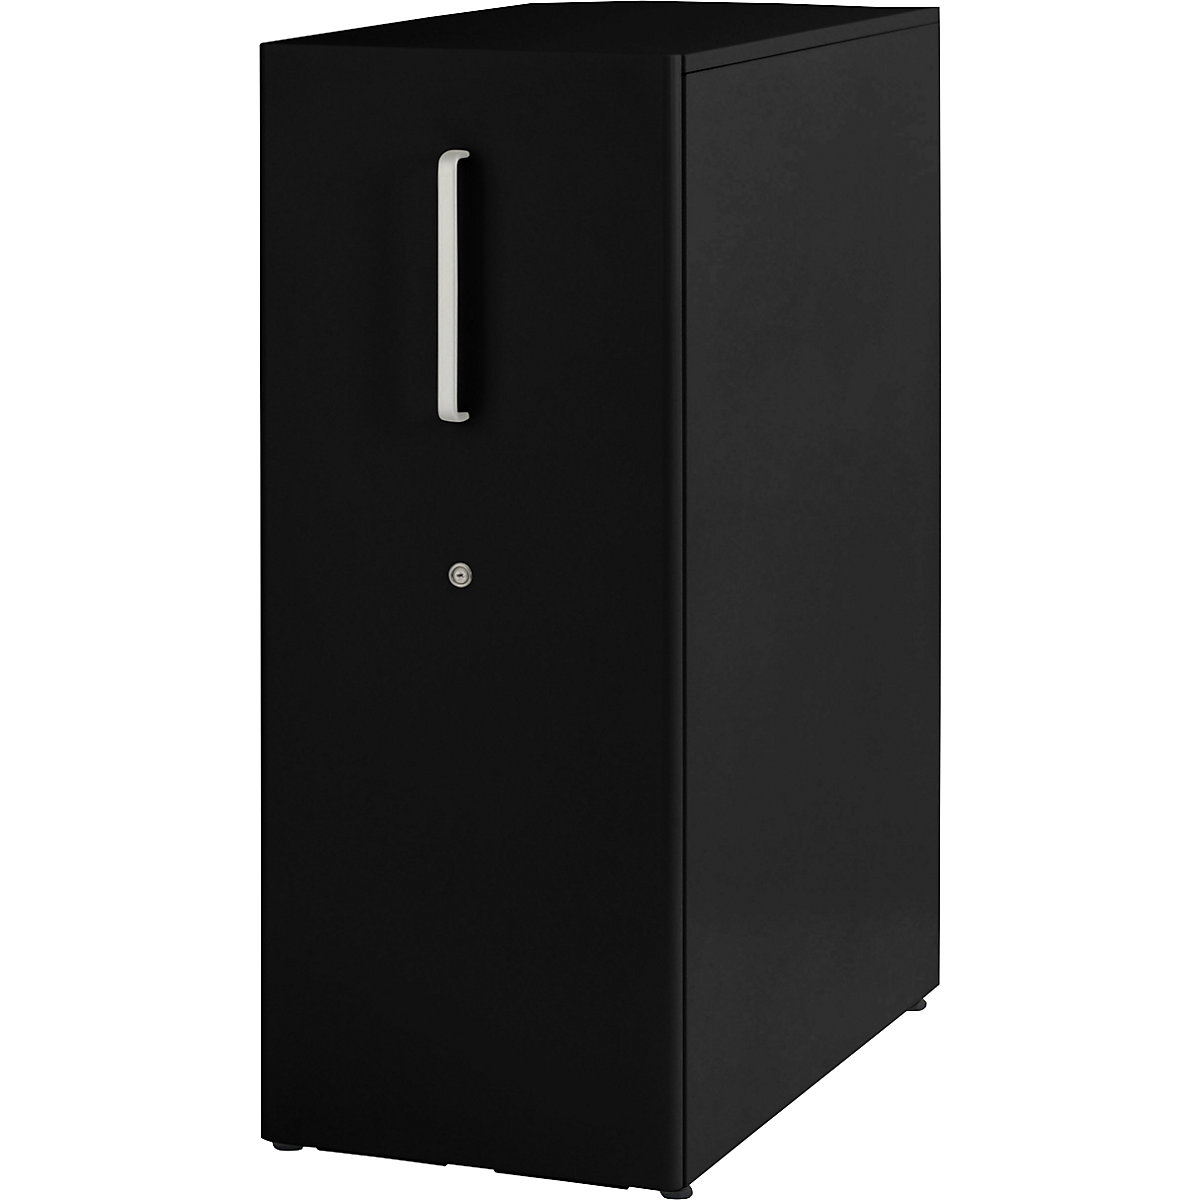 Tower™ 3 add-on furniture, with worktop – BISLEY, for the right side, 2 shelves, black-11